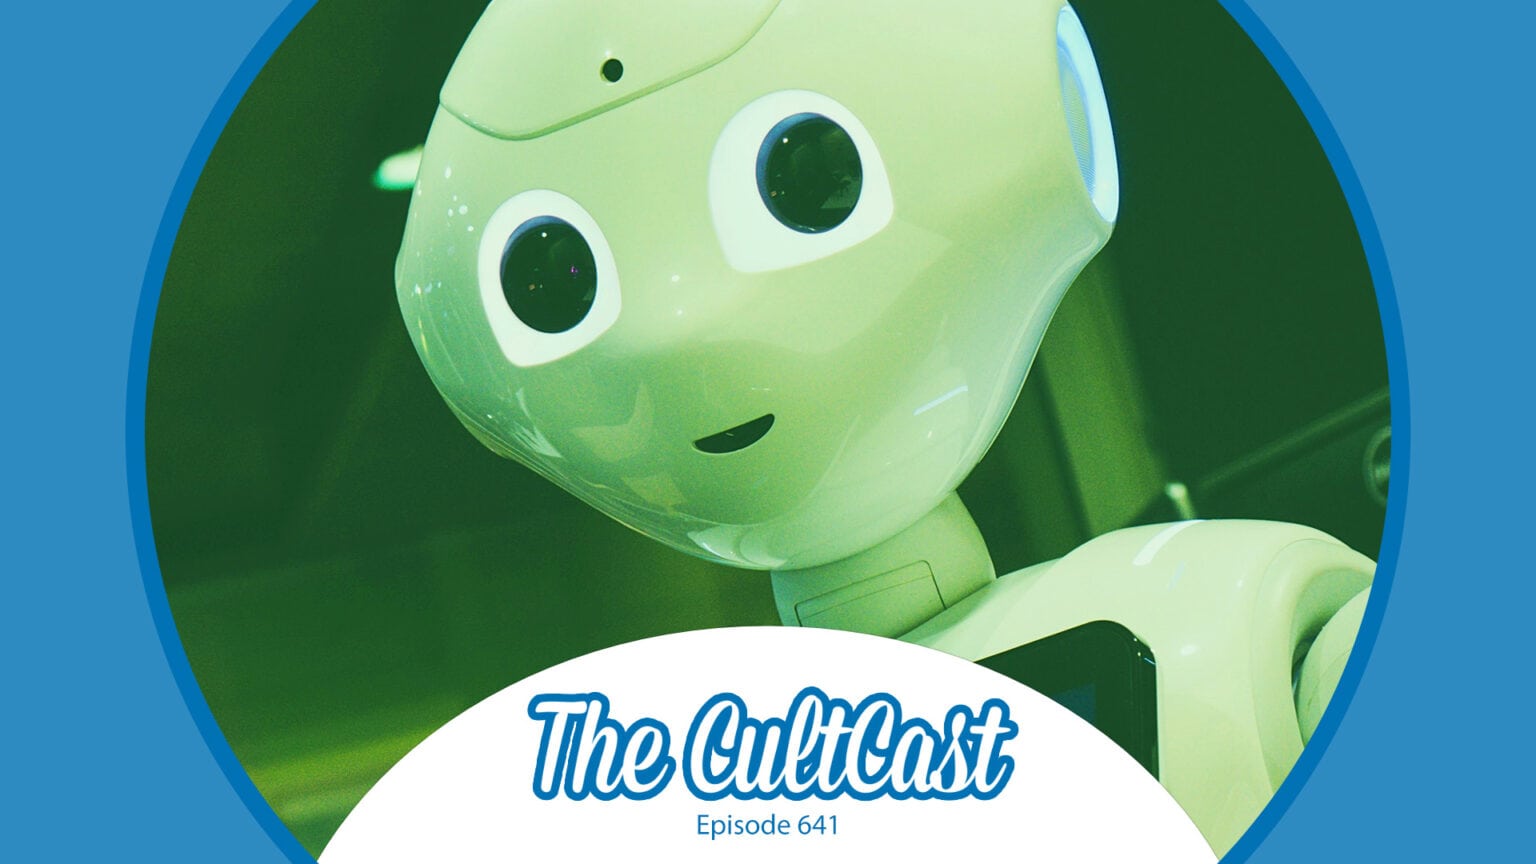 A humanoid robot, plus the CultCast logo and episode 641 label.